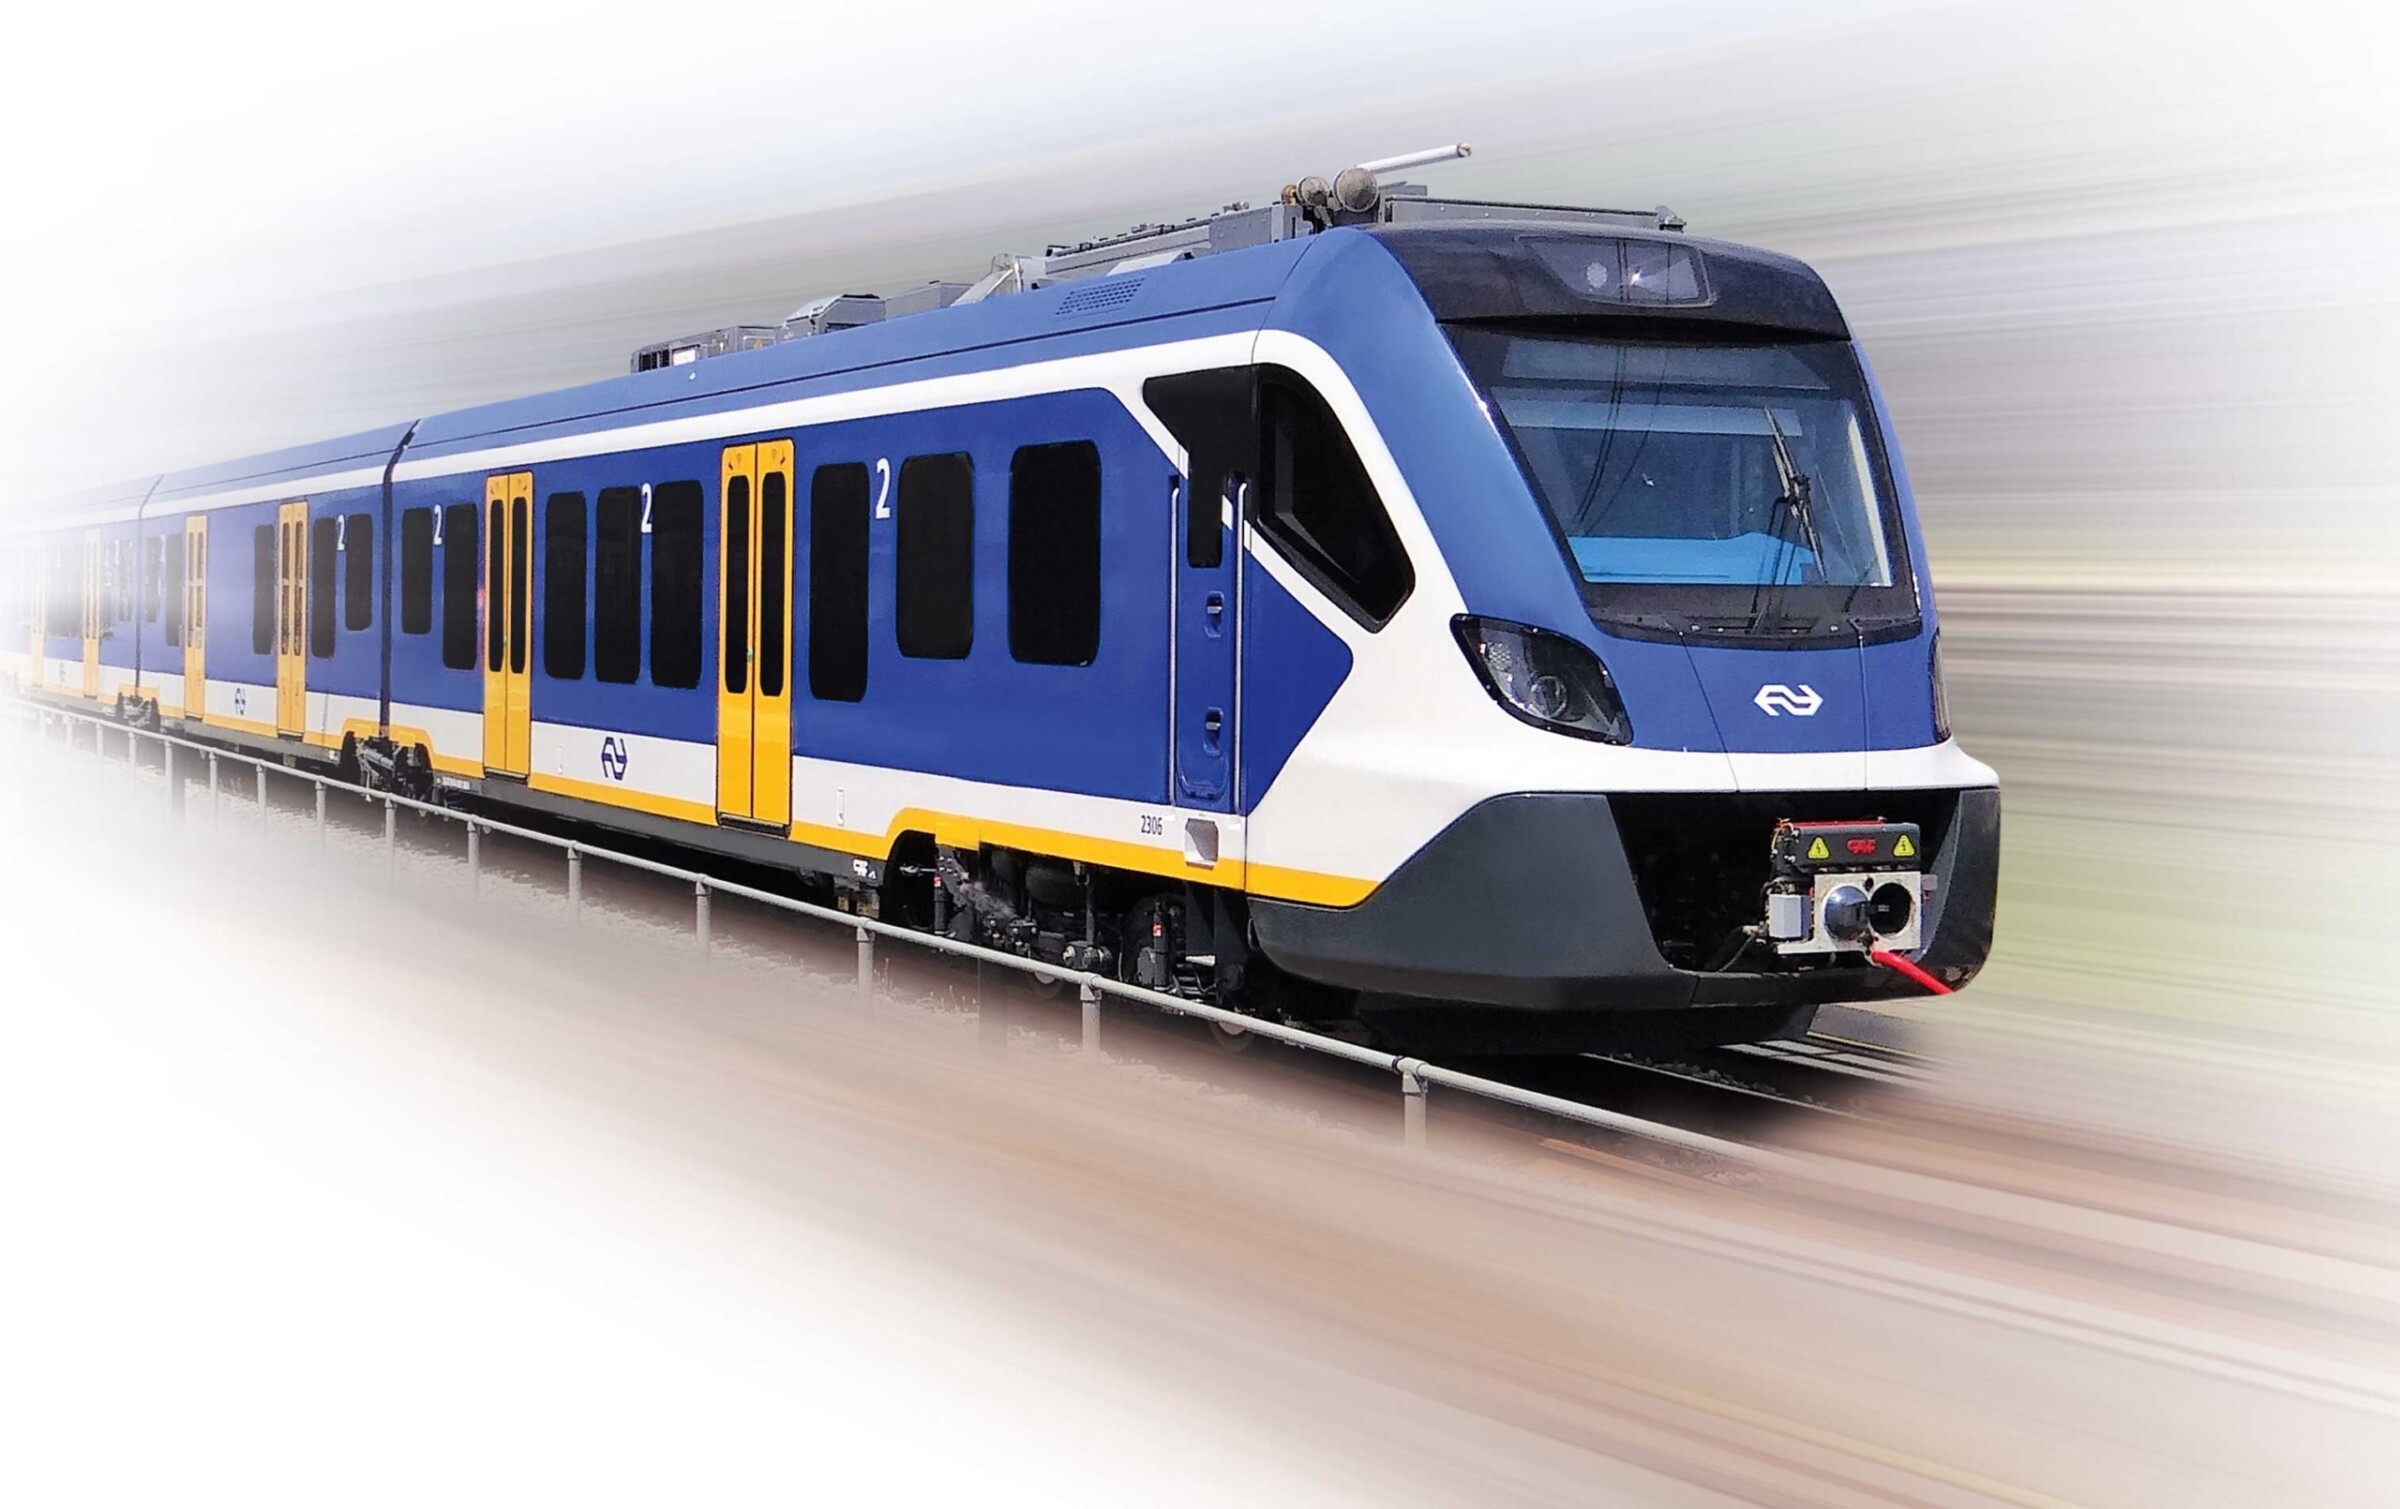 Drive systems for 118 trains of the Dutch railways